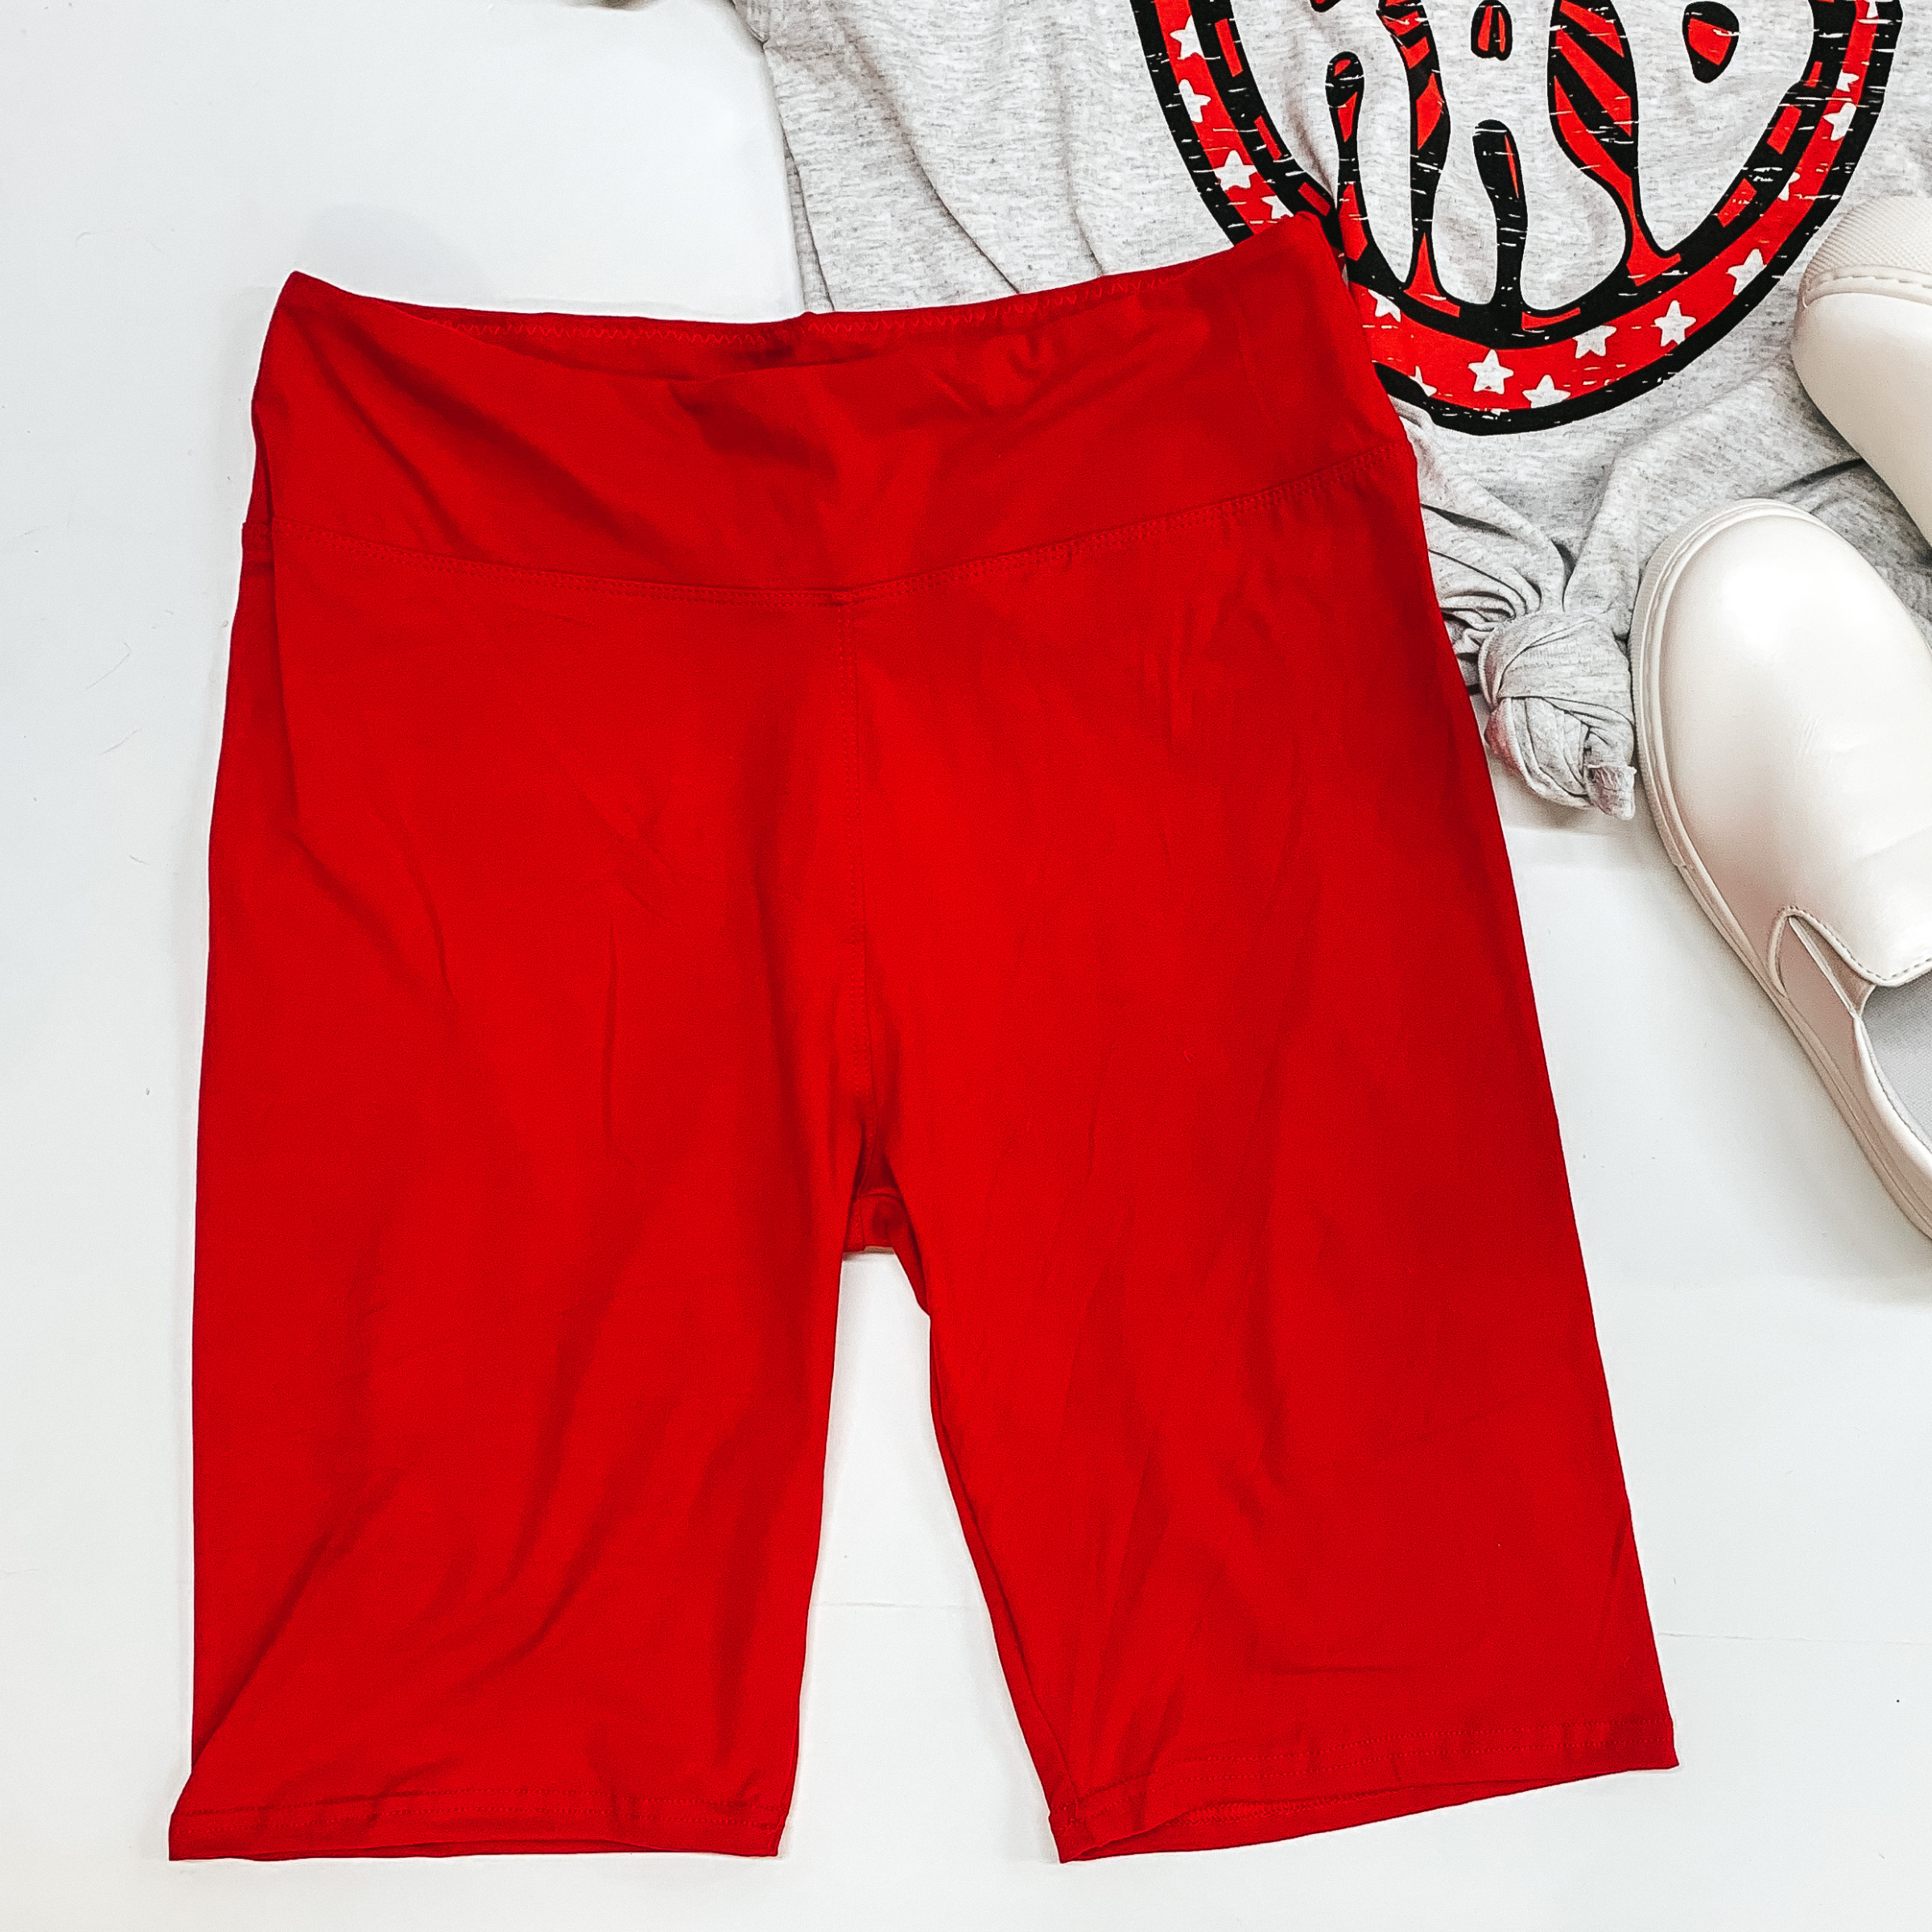 Finish Strong High Waist Biker Shorts in Red - Giddy Up Glamour Boutique